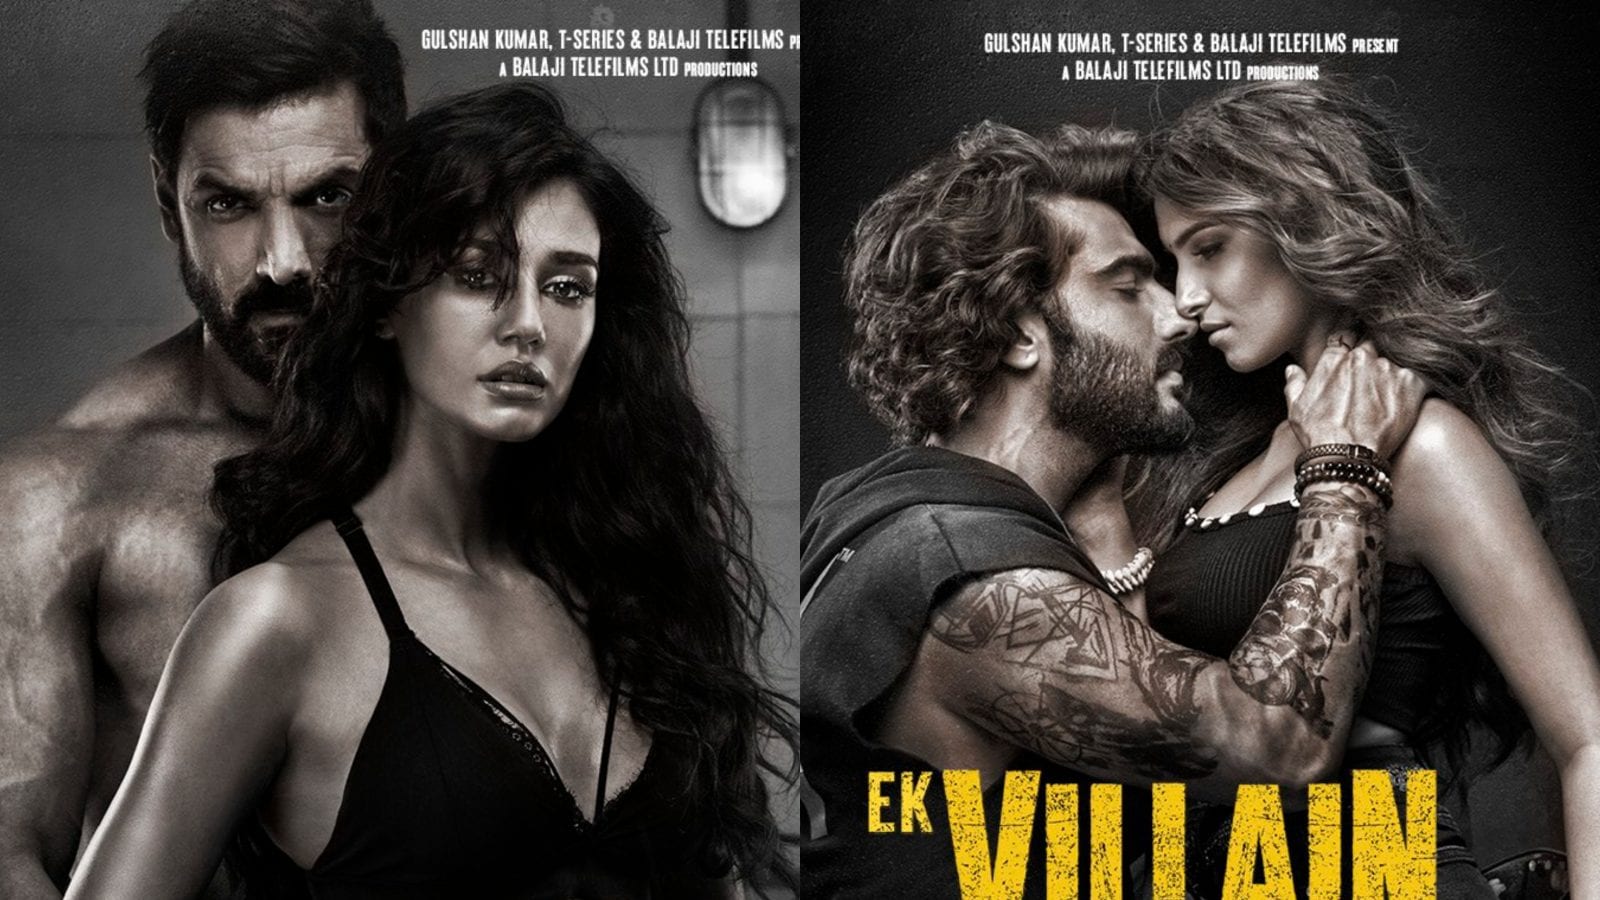 Ek Villain Returns Collects Rs. 7.05 Crs on Day 1, Opens Better at